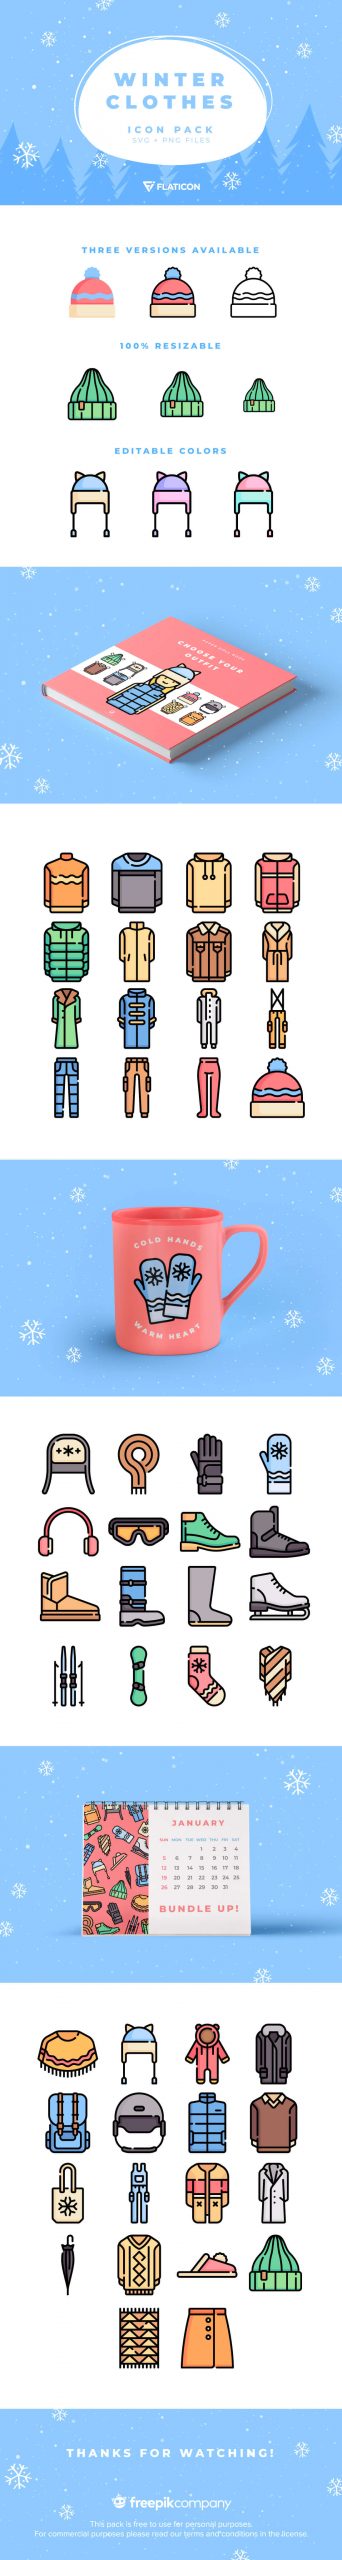 50 different Winter Clothing Icons